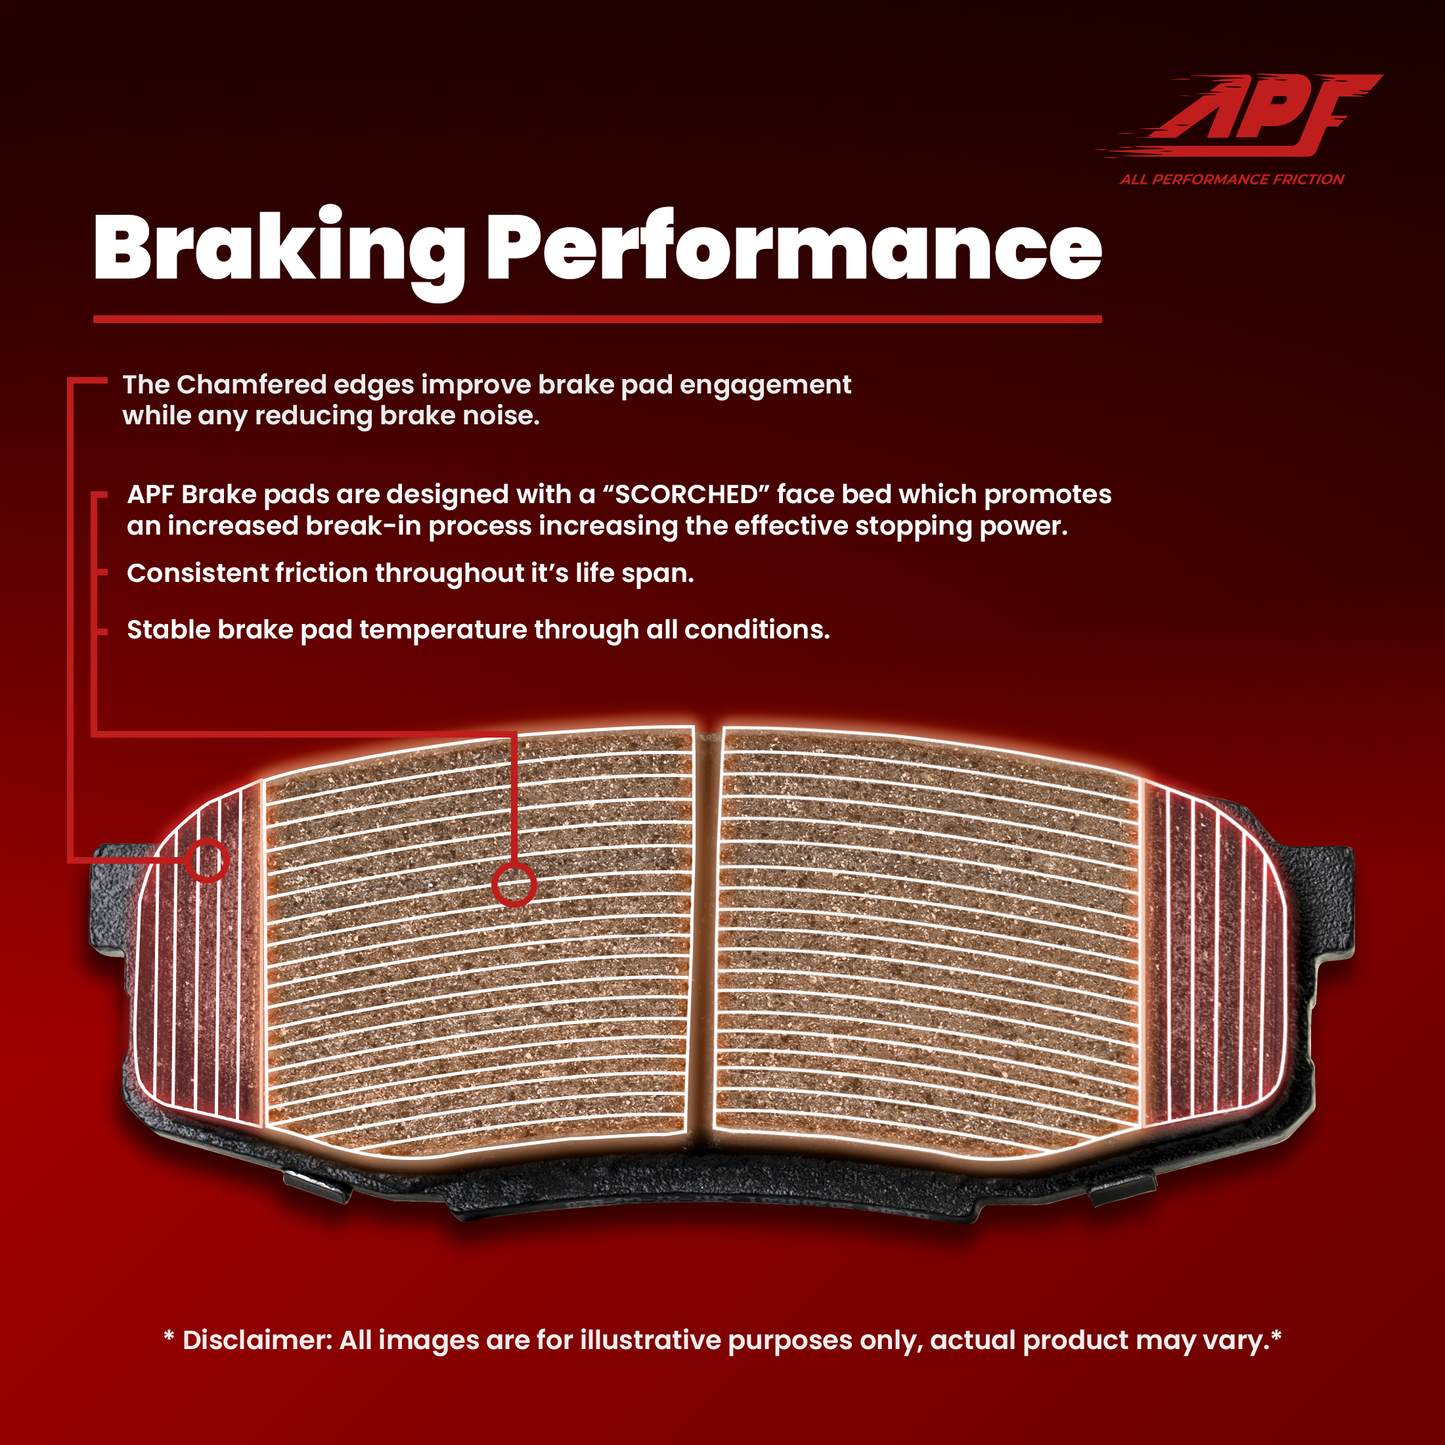 APF All Performance Friction Rear Rotors and Pads Half Kit compatible with Lexus GS430 2006-2007 Zinc Drilled Slotted Rotors with Ceramic Carbon Fiber Brake Pads | $229.57